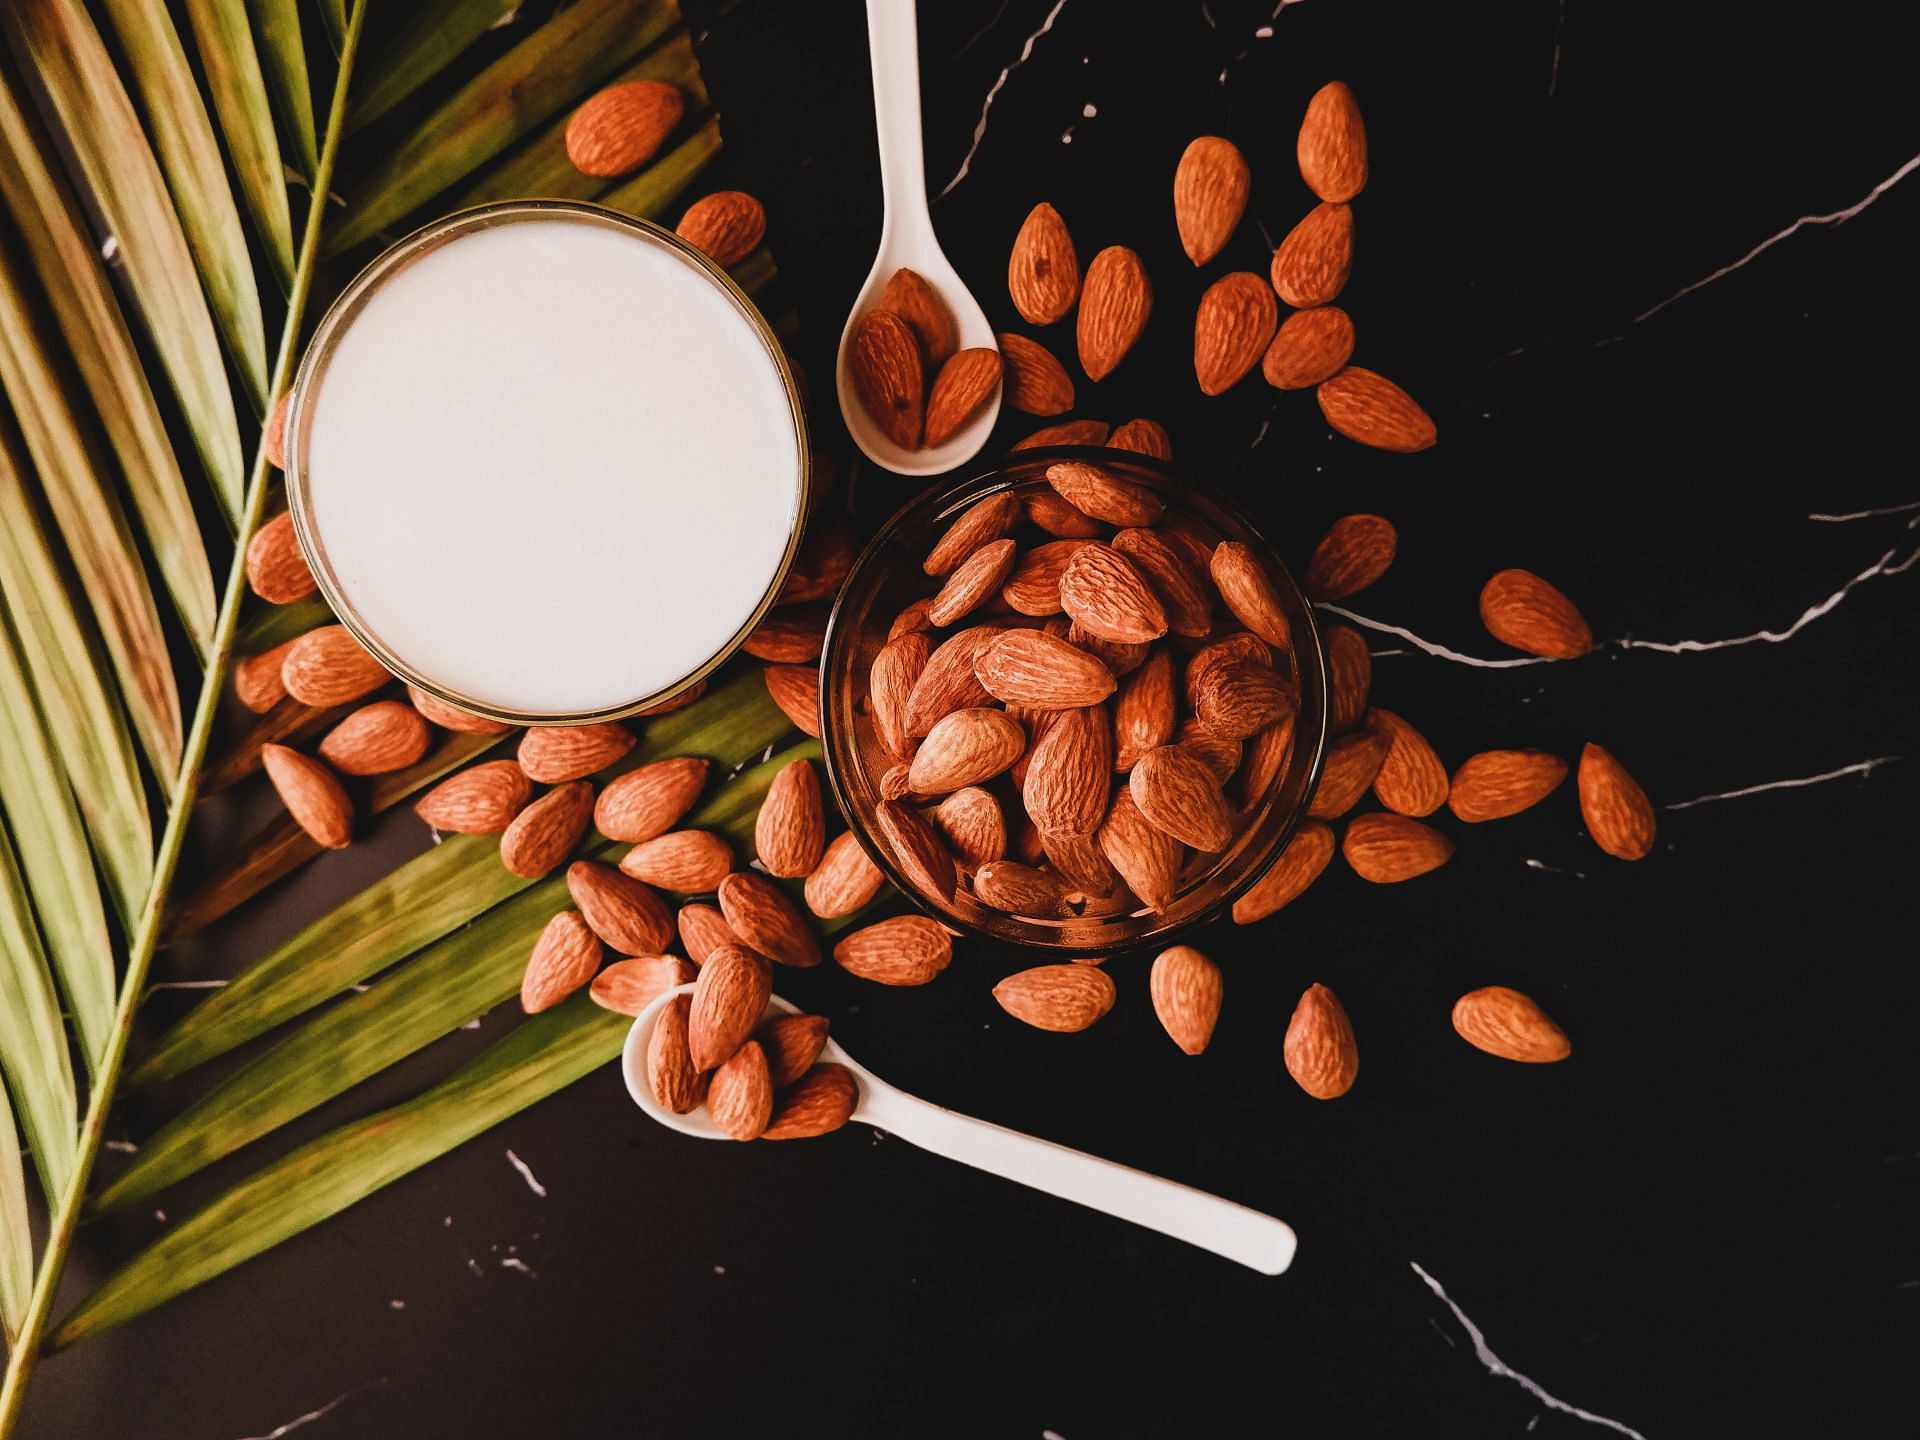 Almonds are among the best high-protein foods for vegans. (Image via Unsplash/Dhanya Purohit)